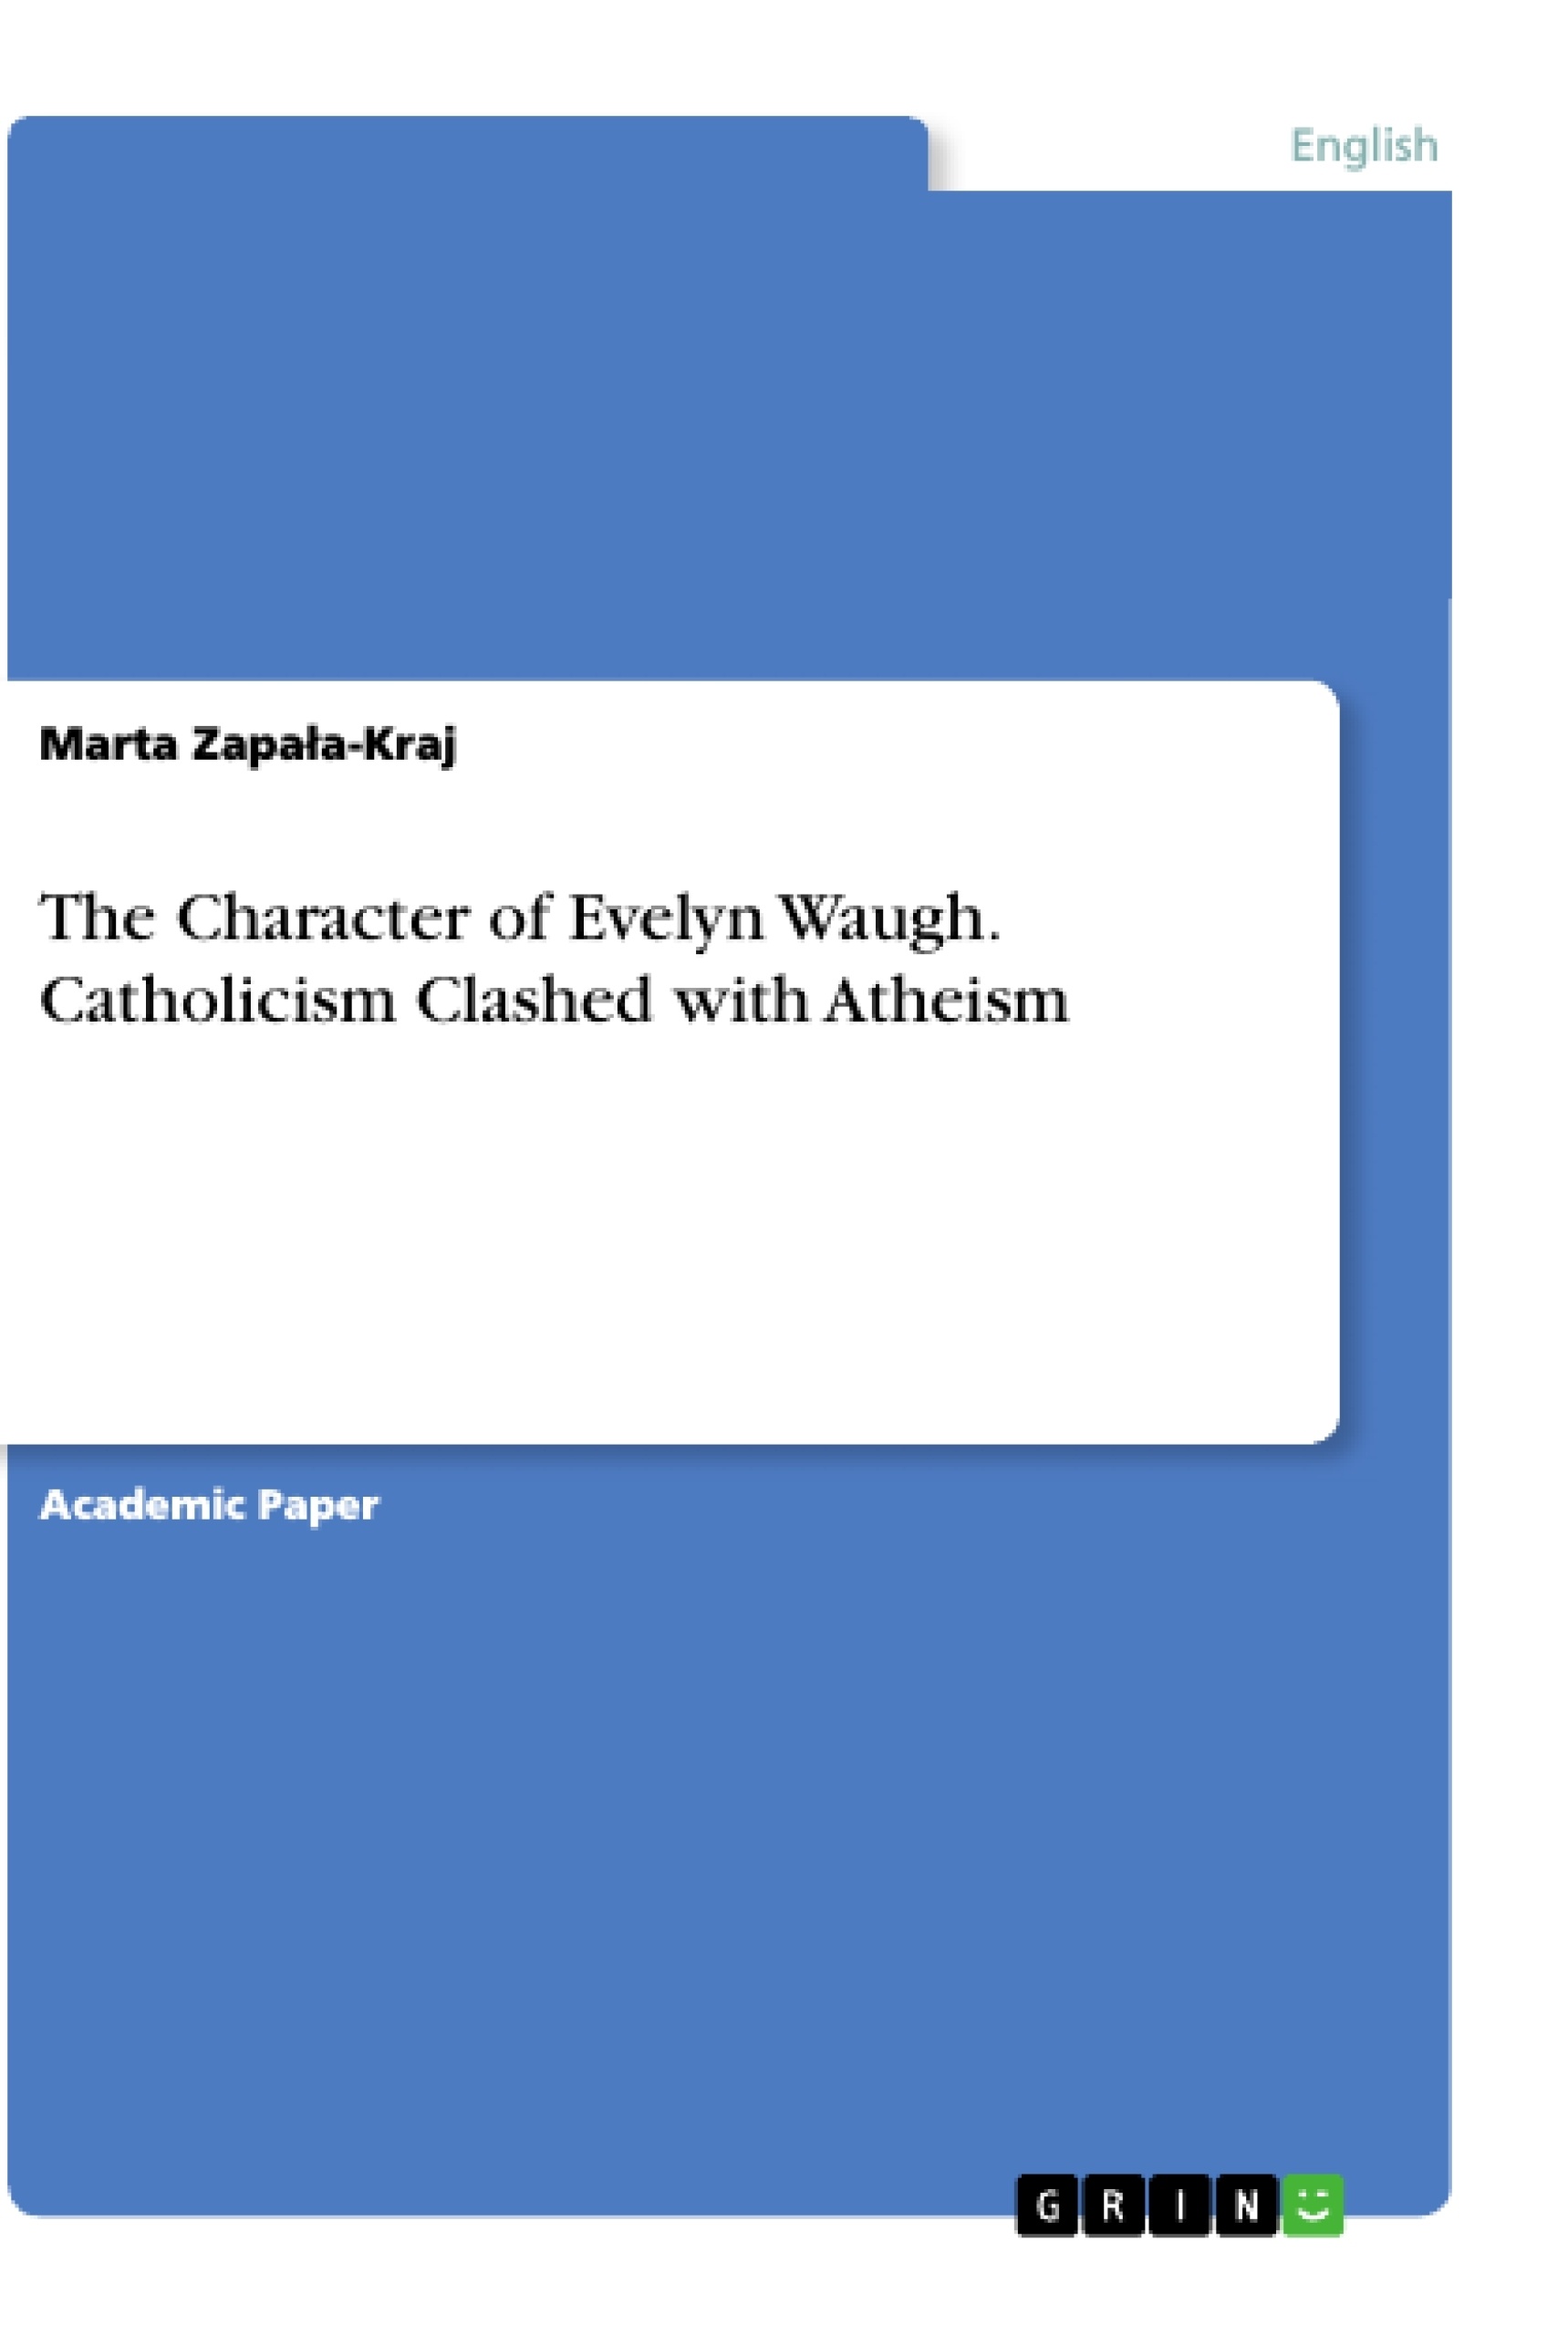 Título: The Character of Evelyn Waugh. Catholicism Clashed with Atheism